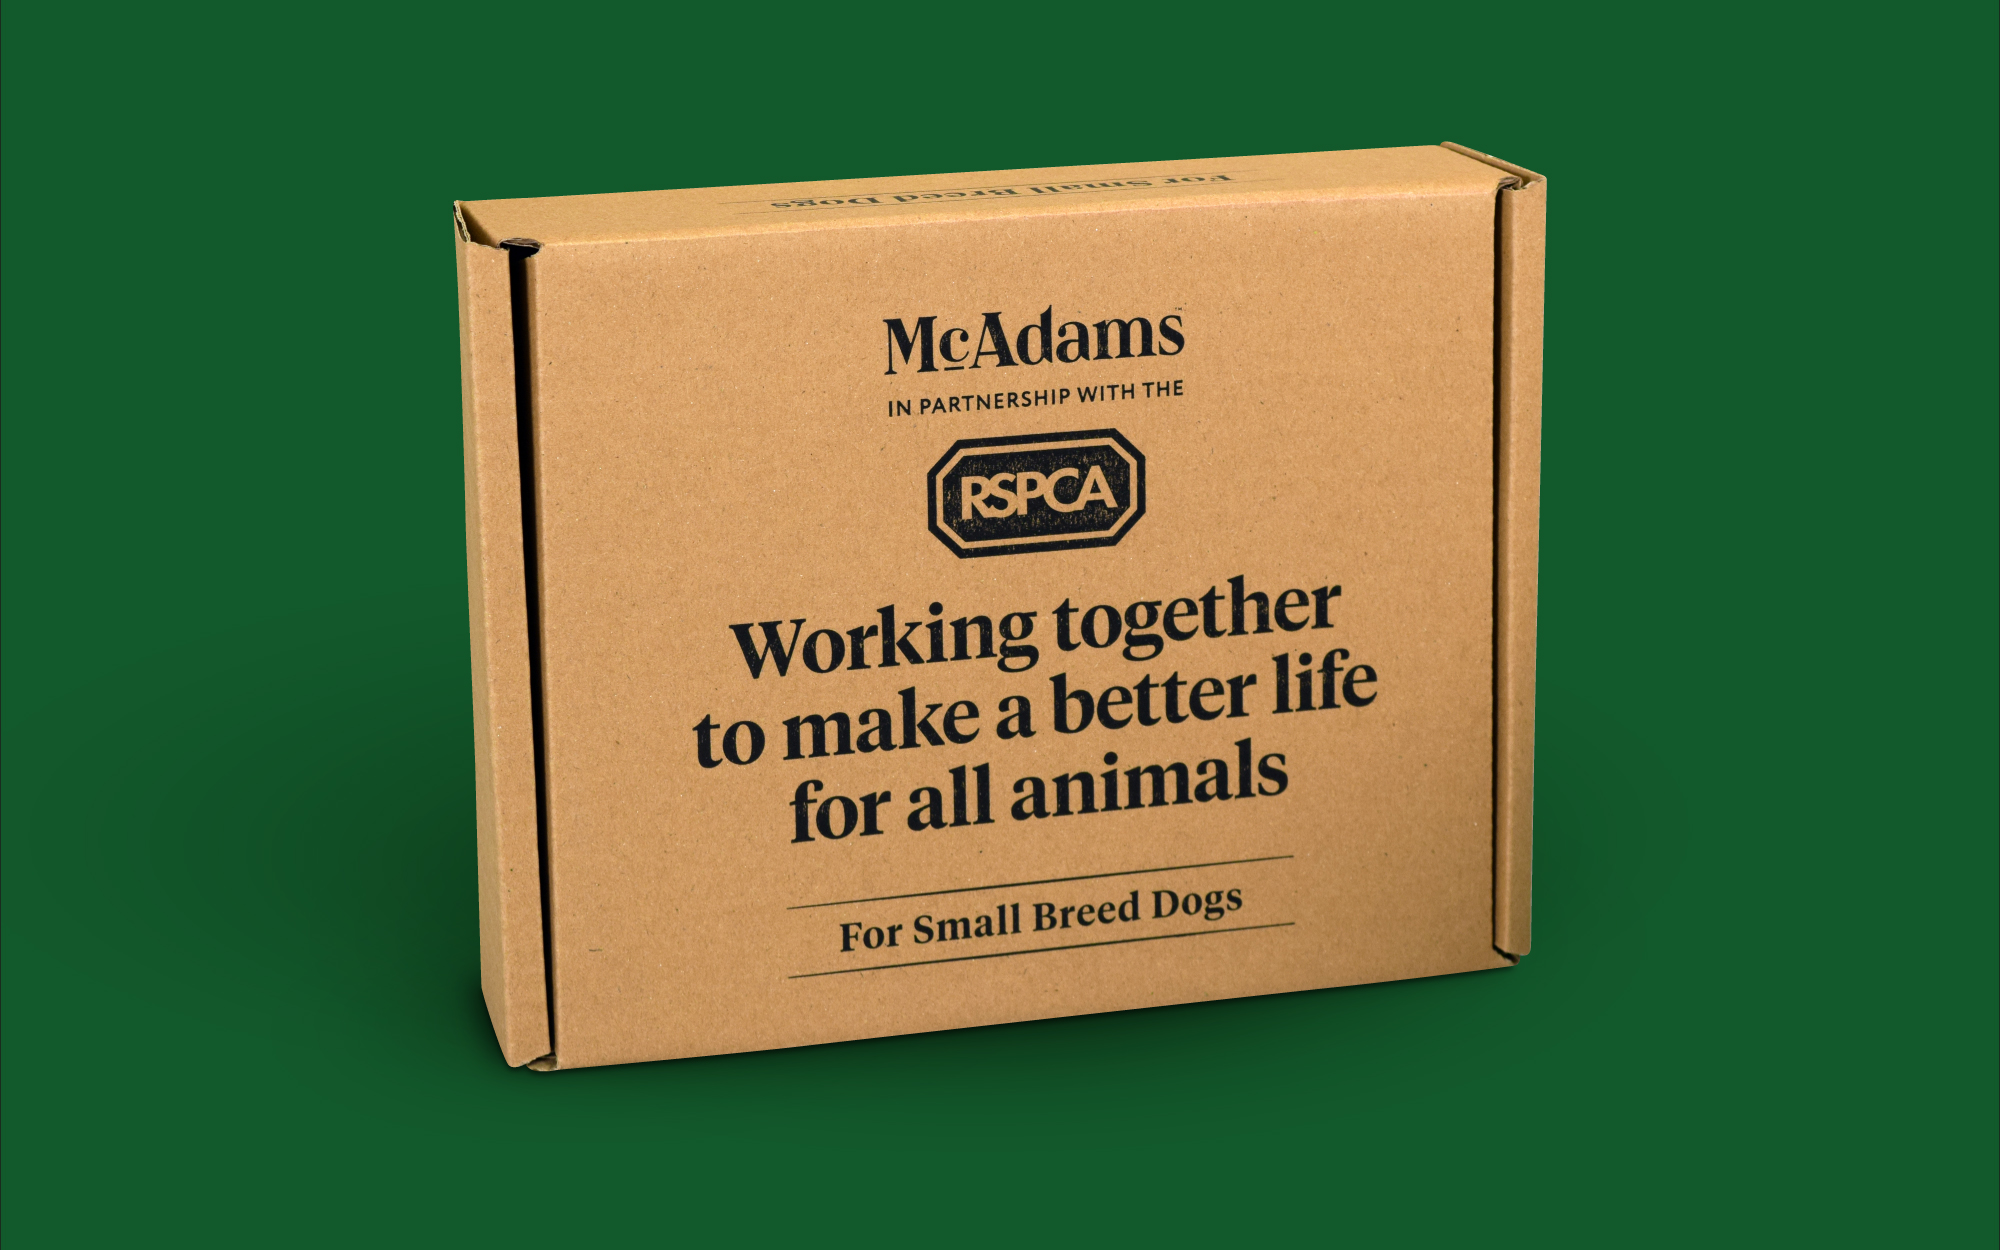 McAdams RSPCA Rehoming Pack outer box